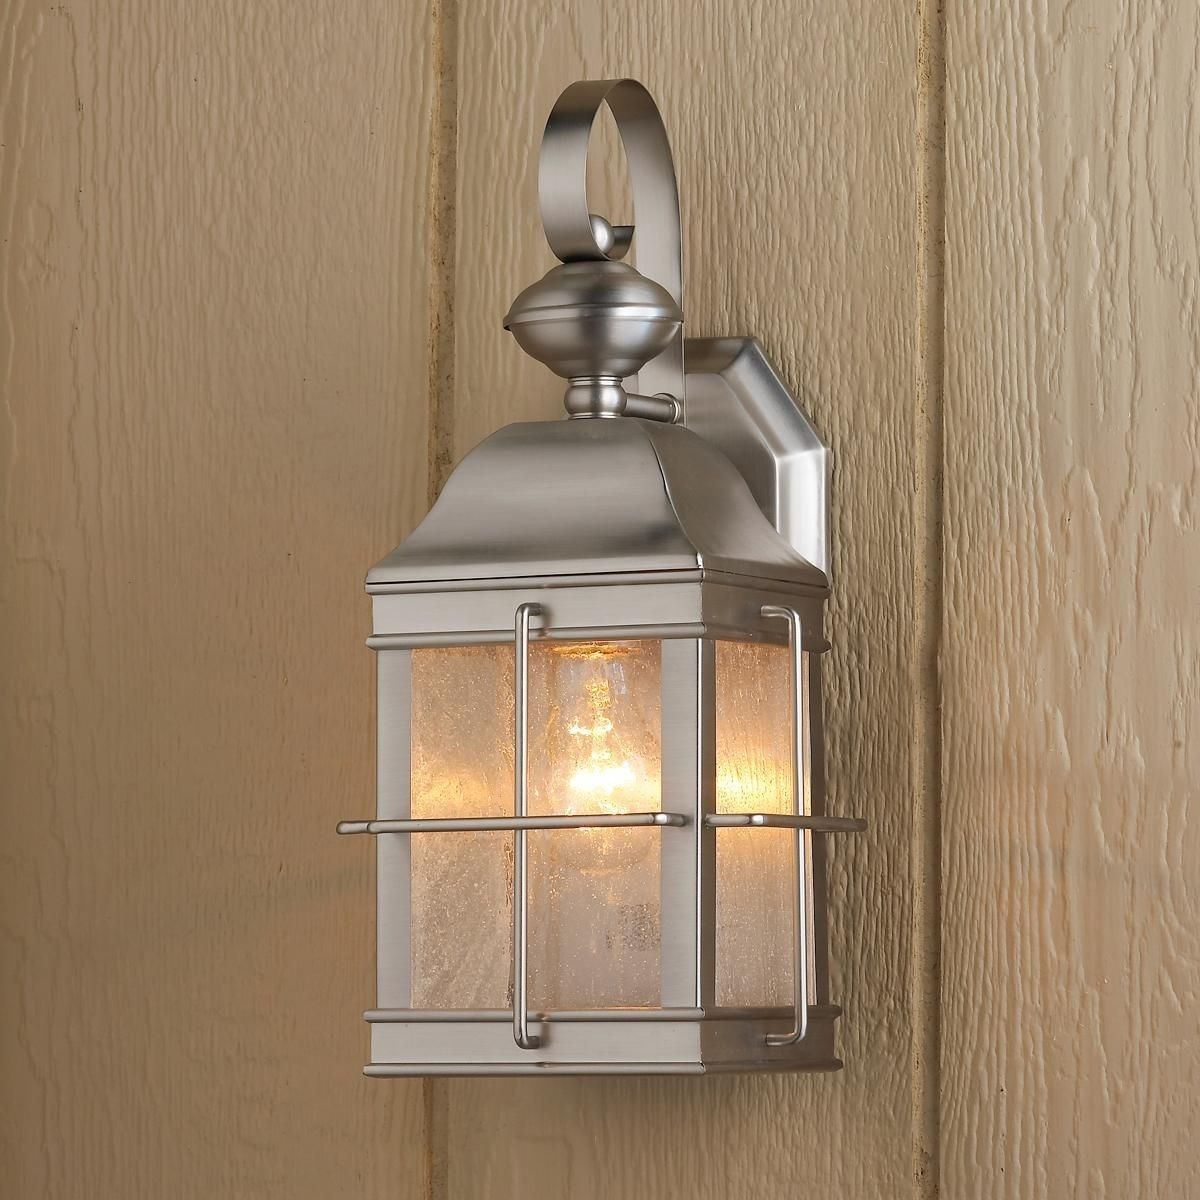 Lovely 30 Outdoor Lights Industrial | Lighting Reference Page Inside Industrial Outdoor Lanterns (View 10 of 20)